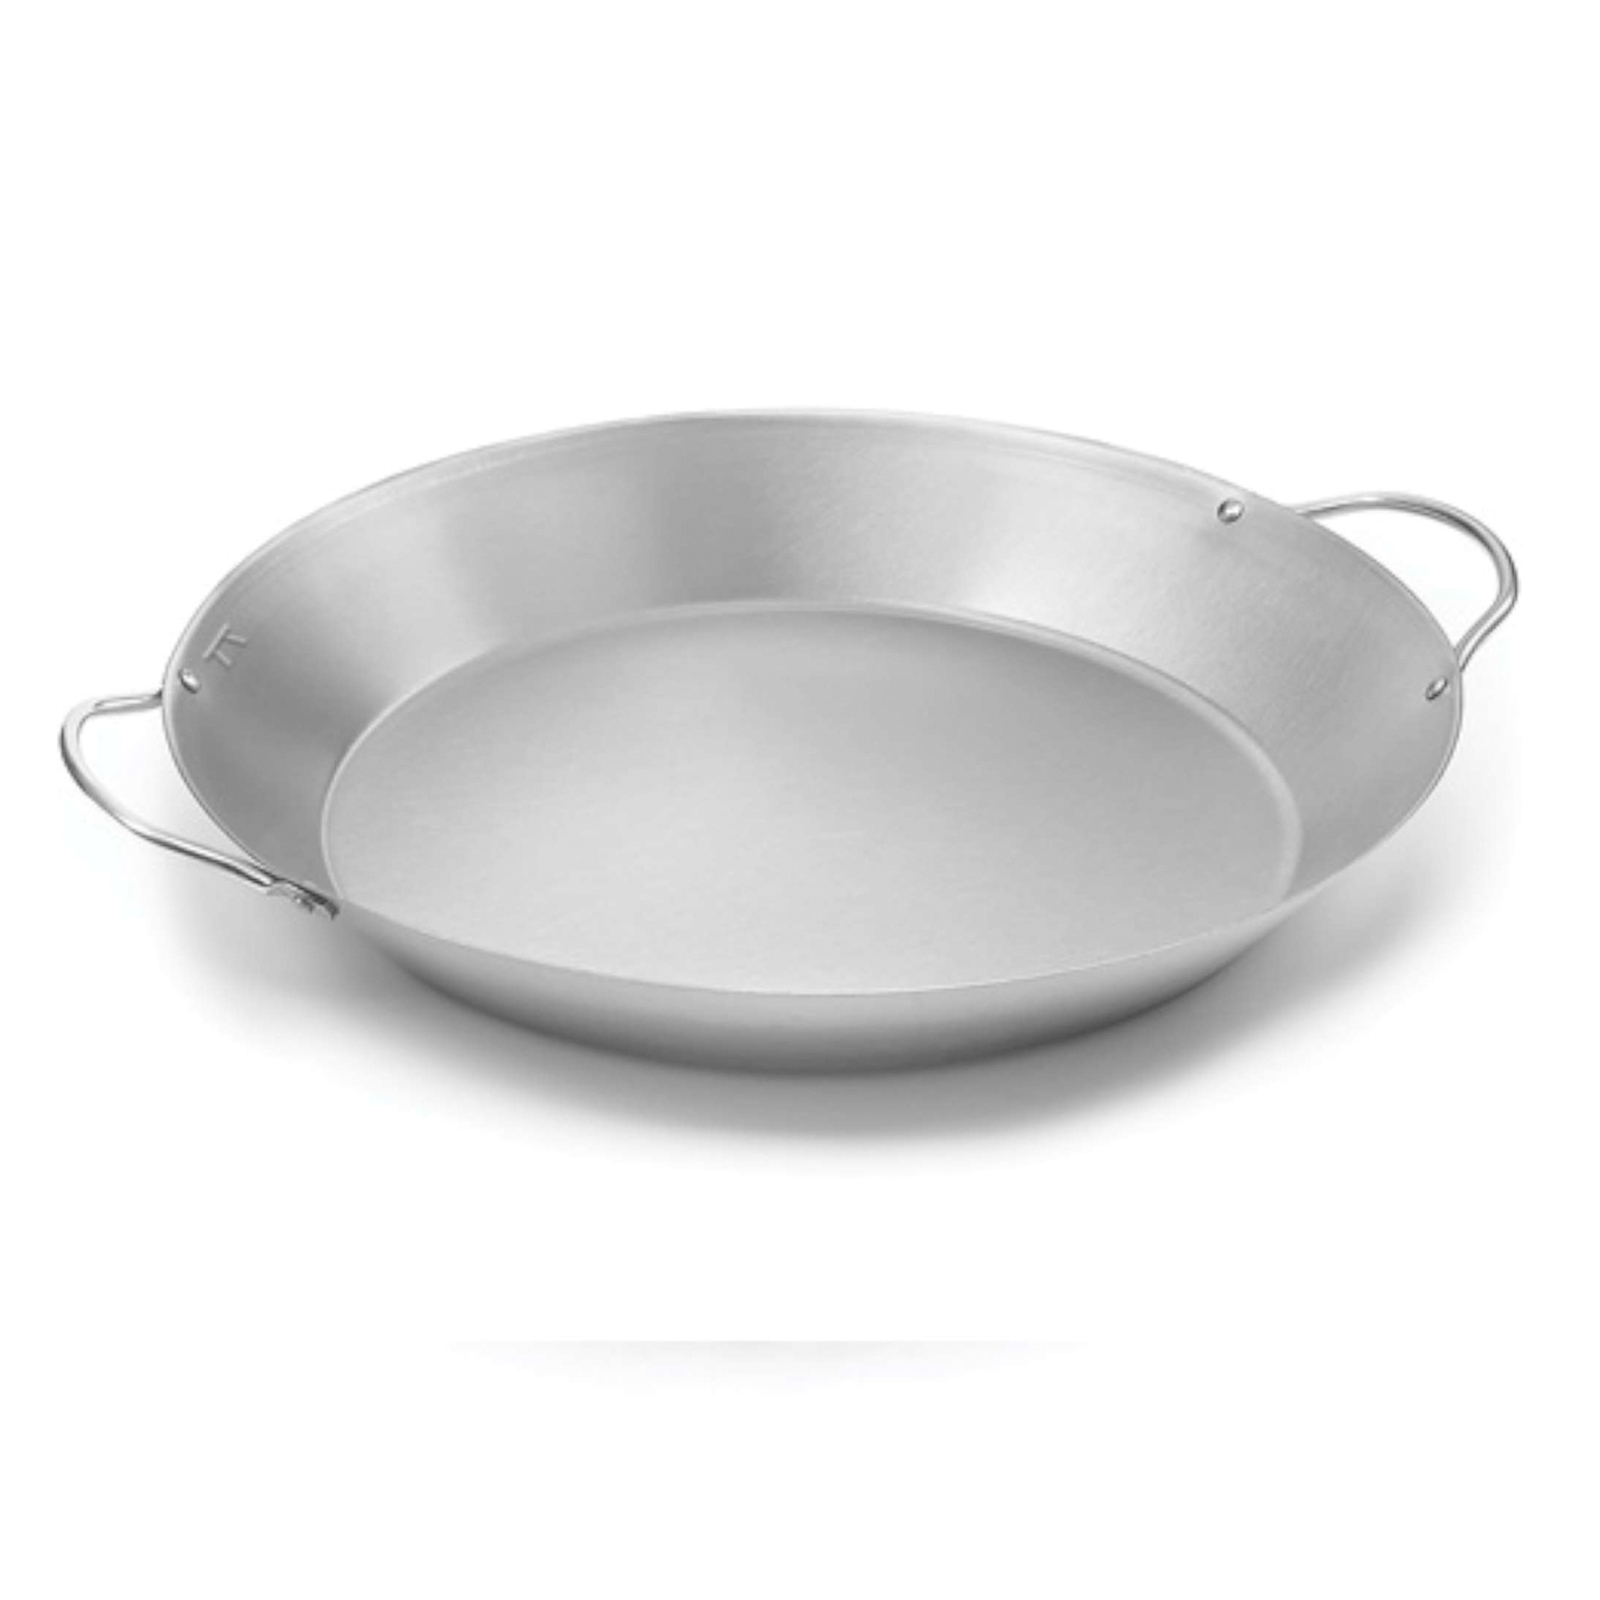 Outset Stainless Steel 16-inch Diameter Paella Pan